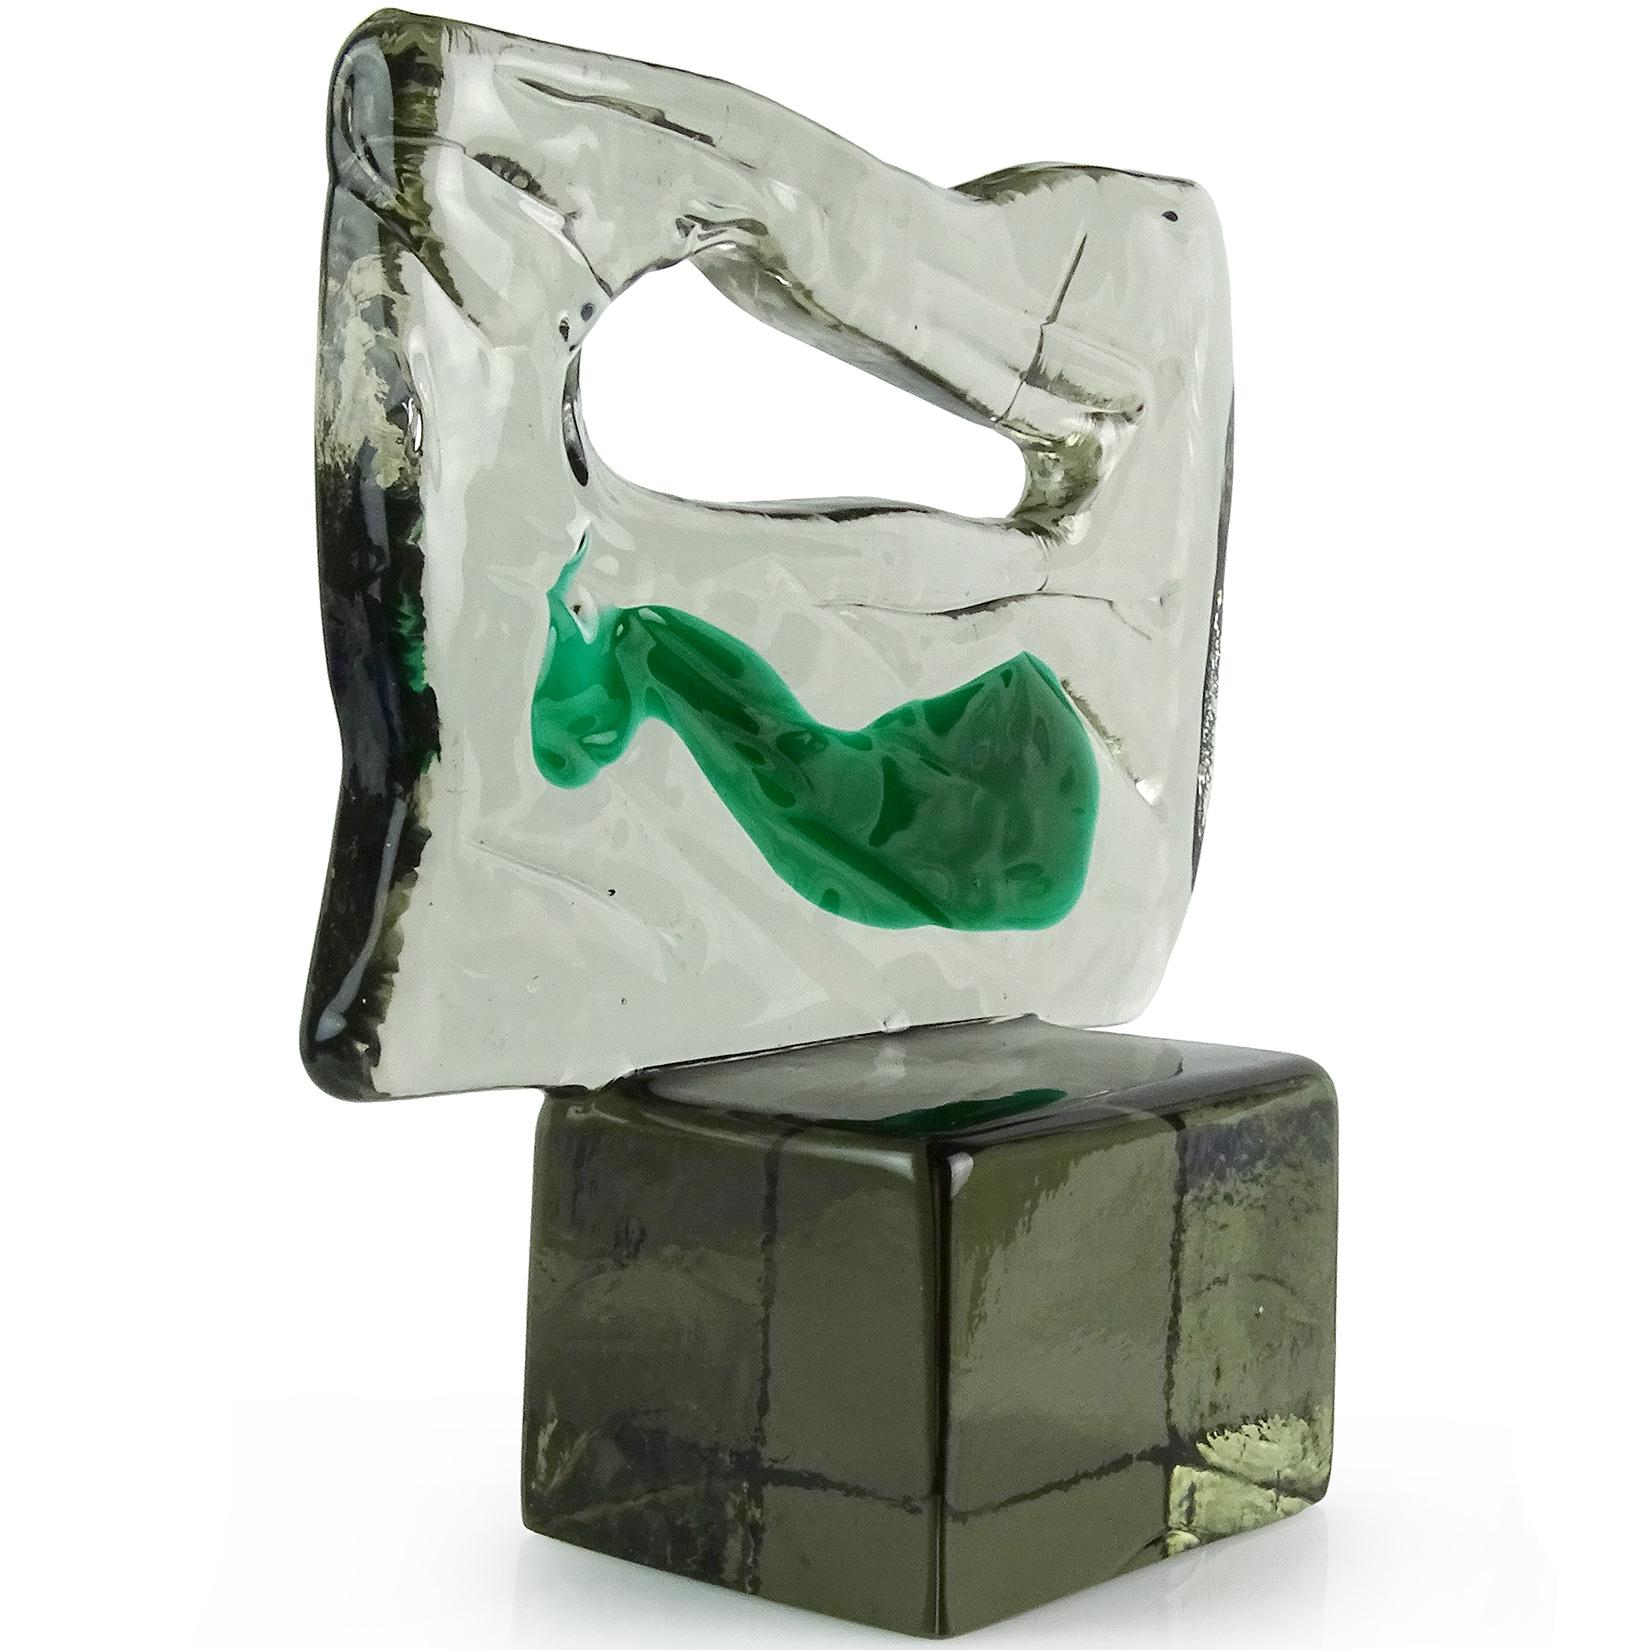 Beautiful vintage Murano hand blown smoky grey color with green paint stroke Italian art glass sculpture. Documented to Luciano Gaspari for the Salviati company. Has a Modernist abstract design, with textured glass slab mounted on a smooth block